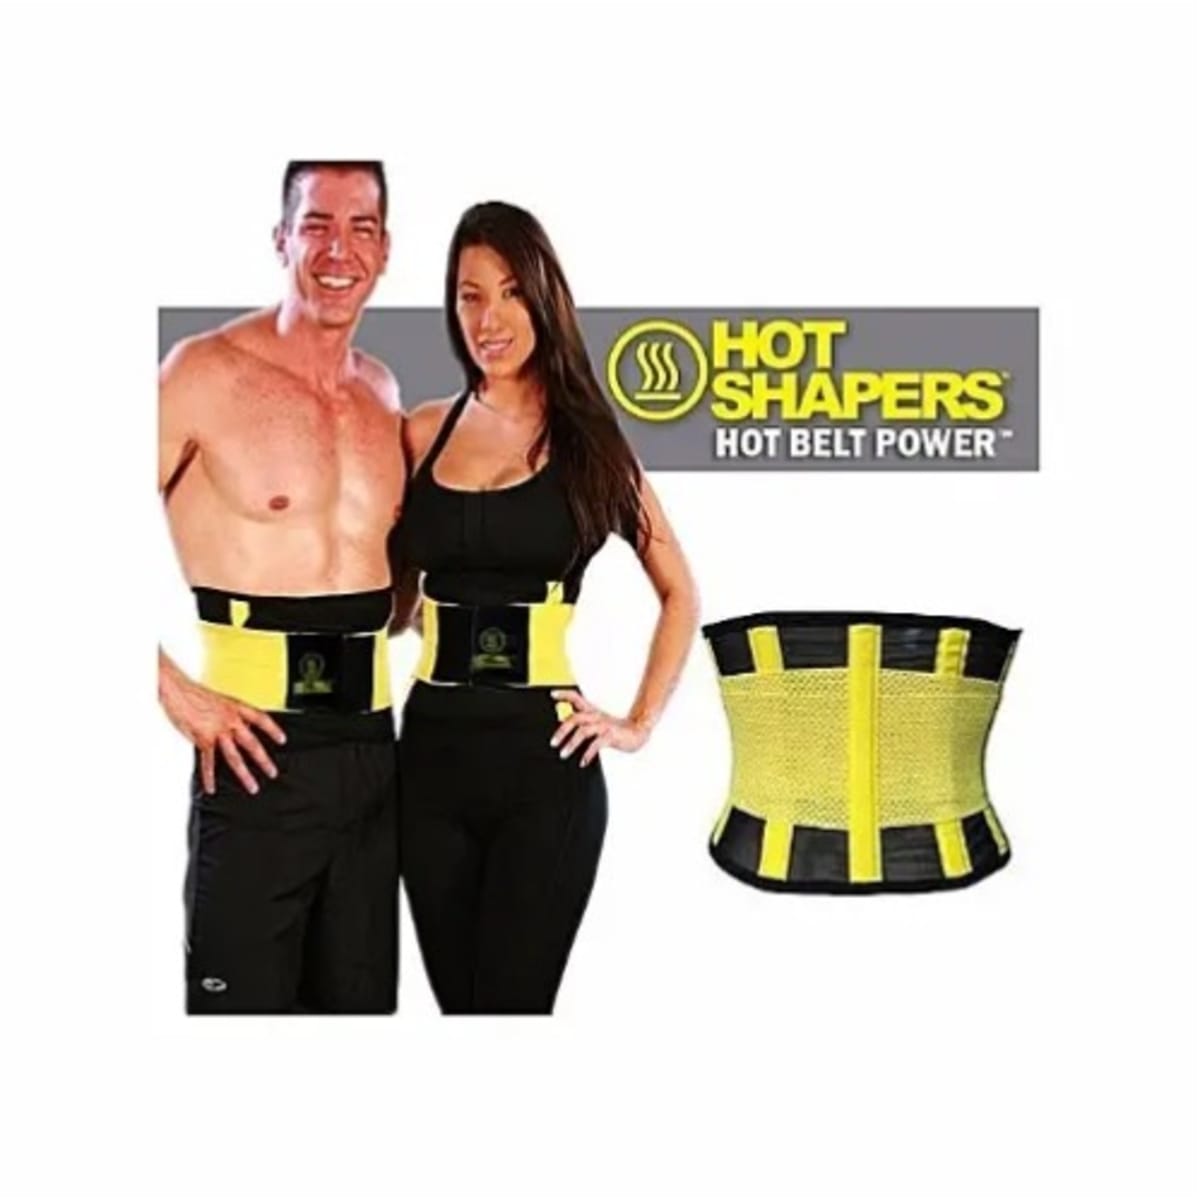 Hot Shapers